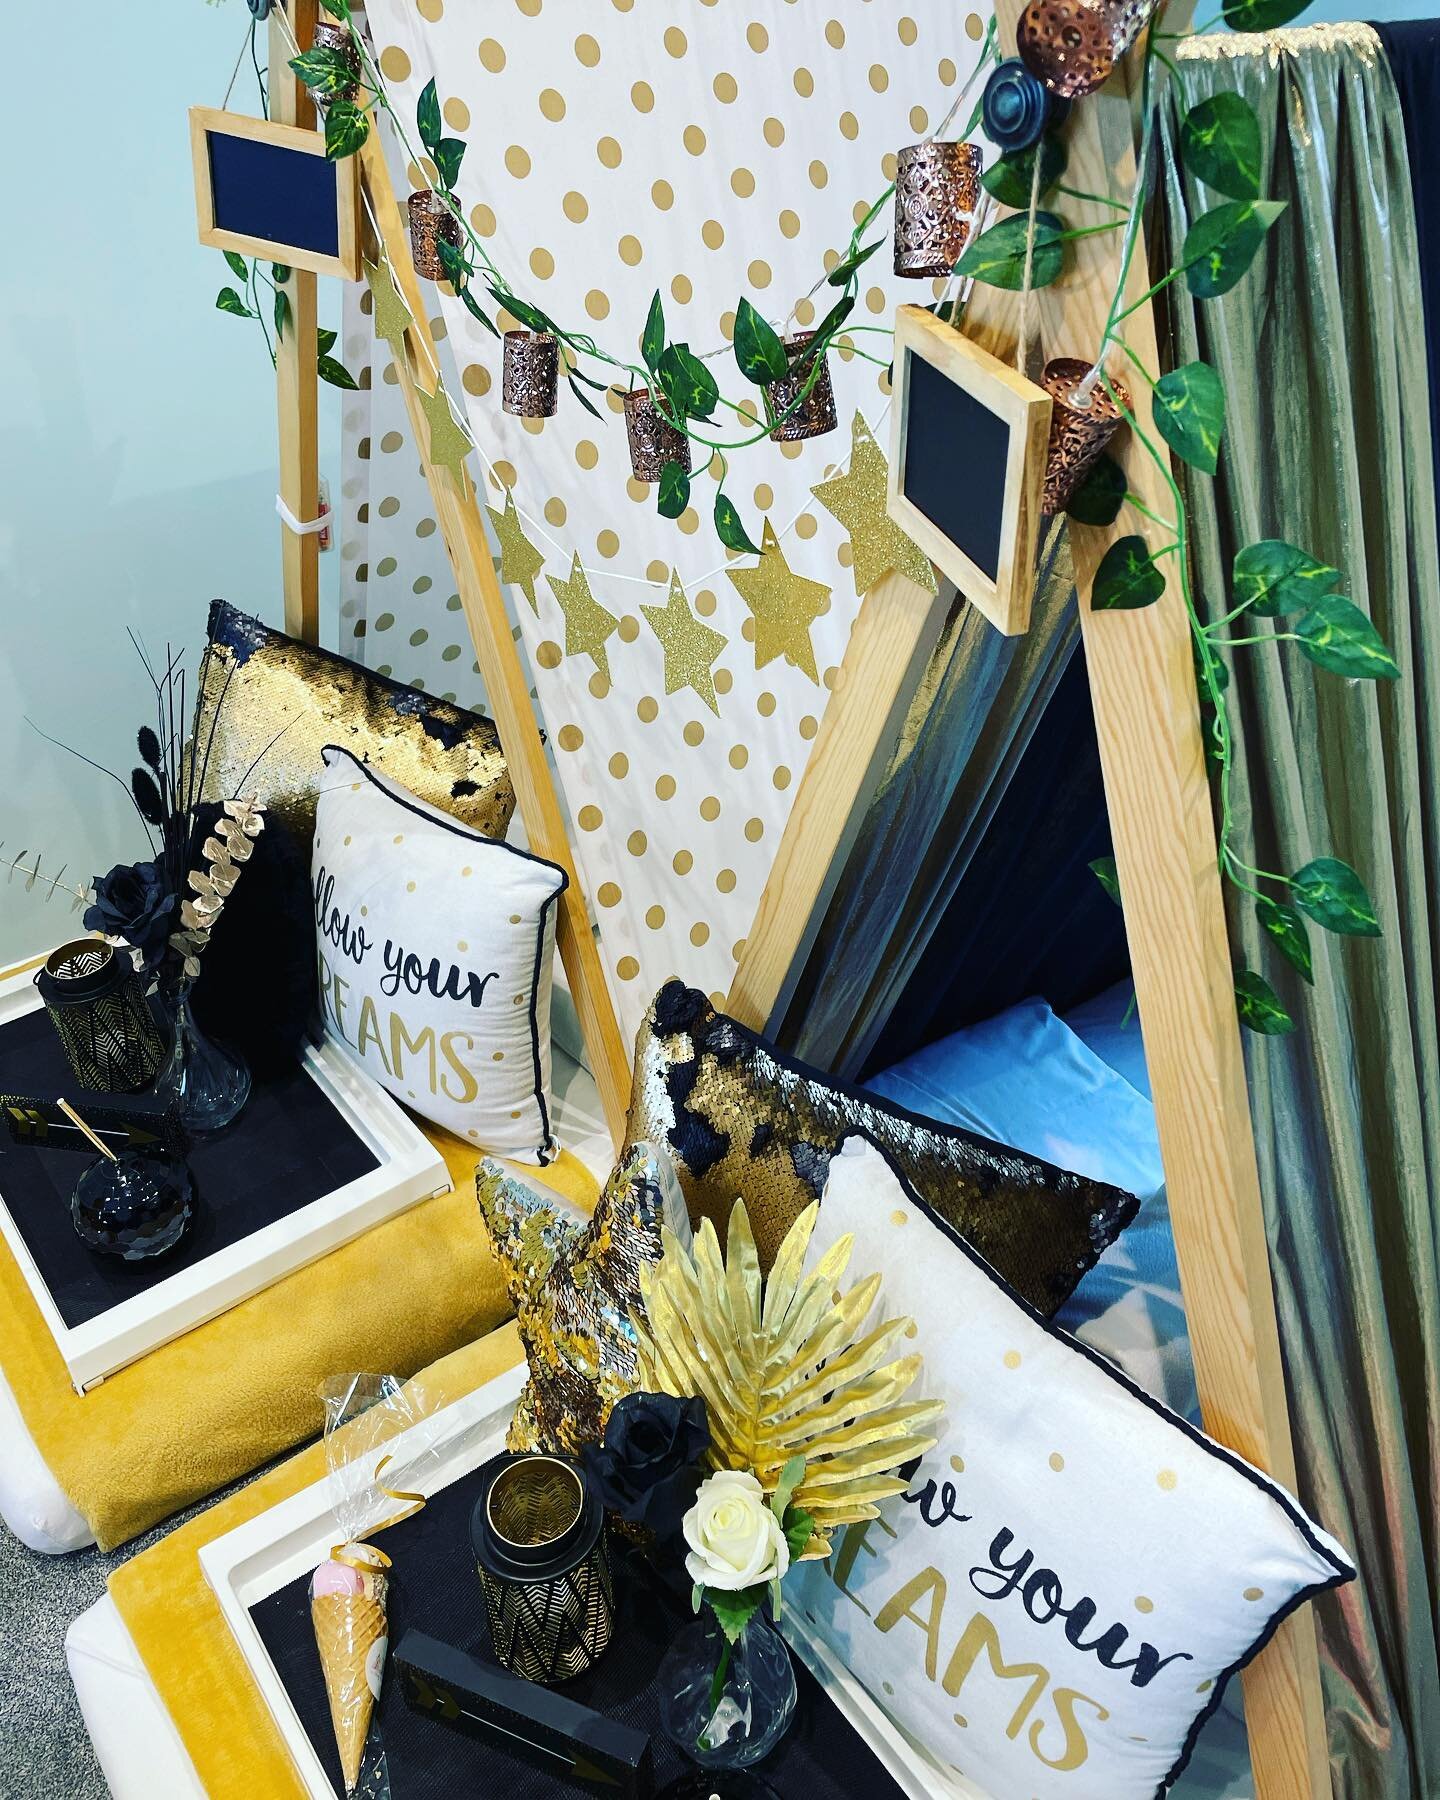 Our last set up of last weekend was our &lsquo;glitz and glam&rsquo; themed sleepover teepees for birthday girl Eleanor&rsquo;s delayed birthday celebrations&hellip; 🖤💛🖤💛🖤